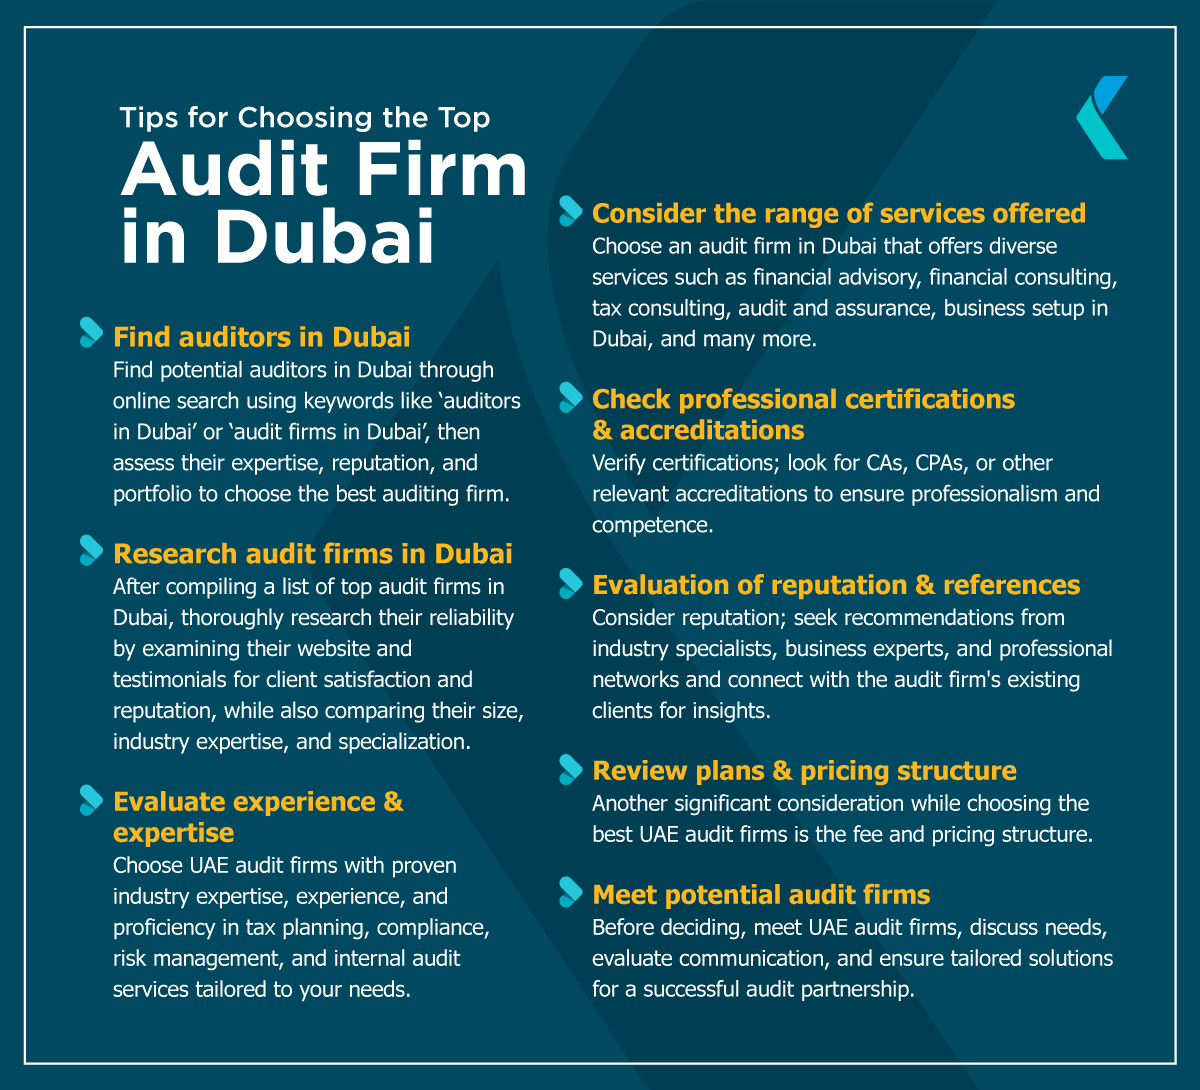 Things to Consider While Choosing the Top Audit Firm in Dubai